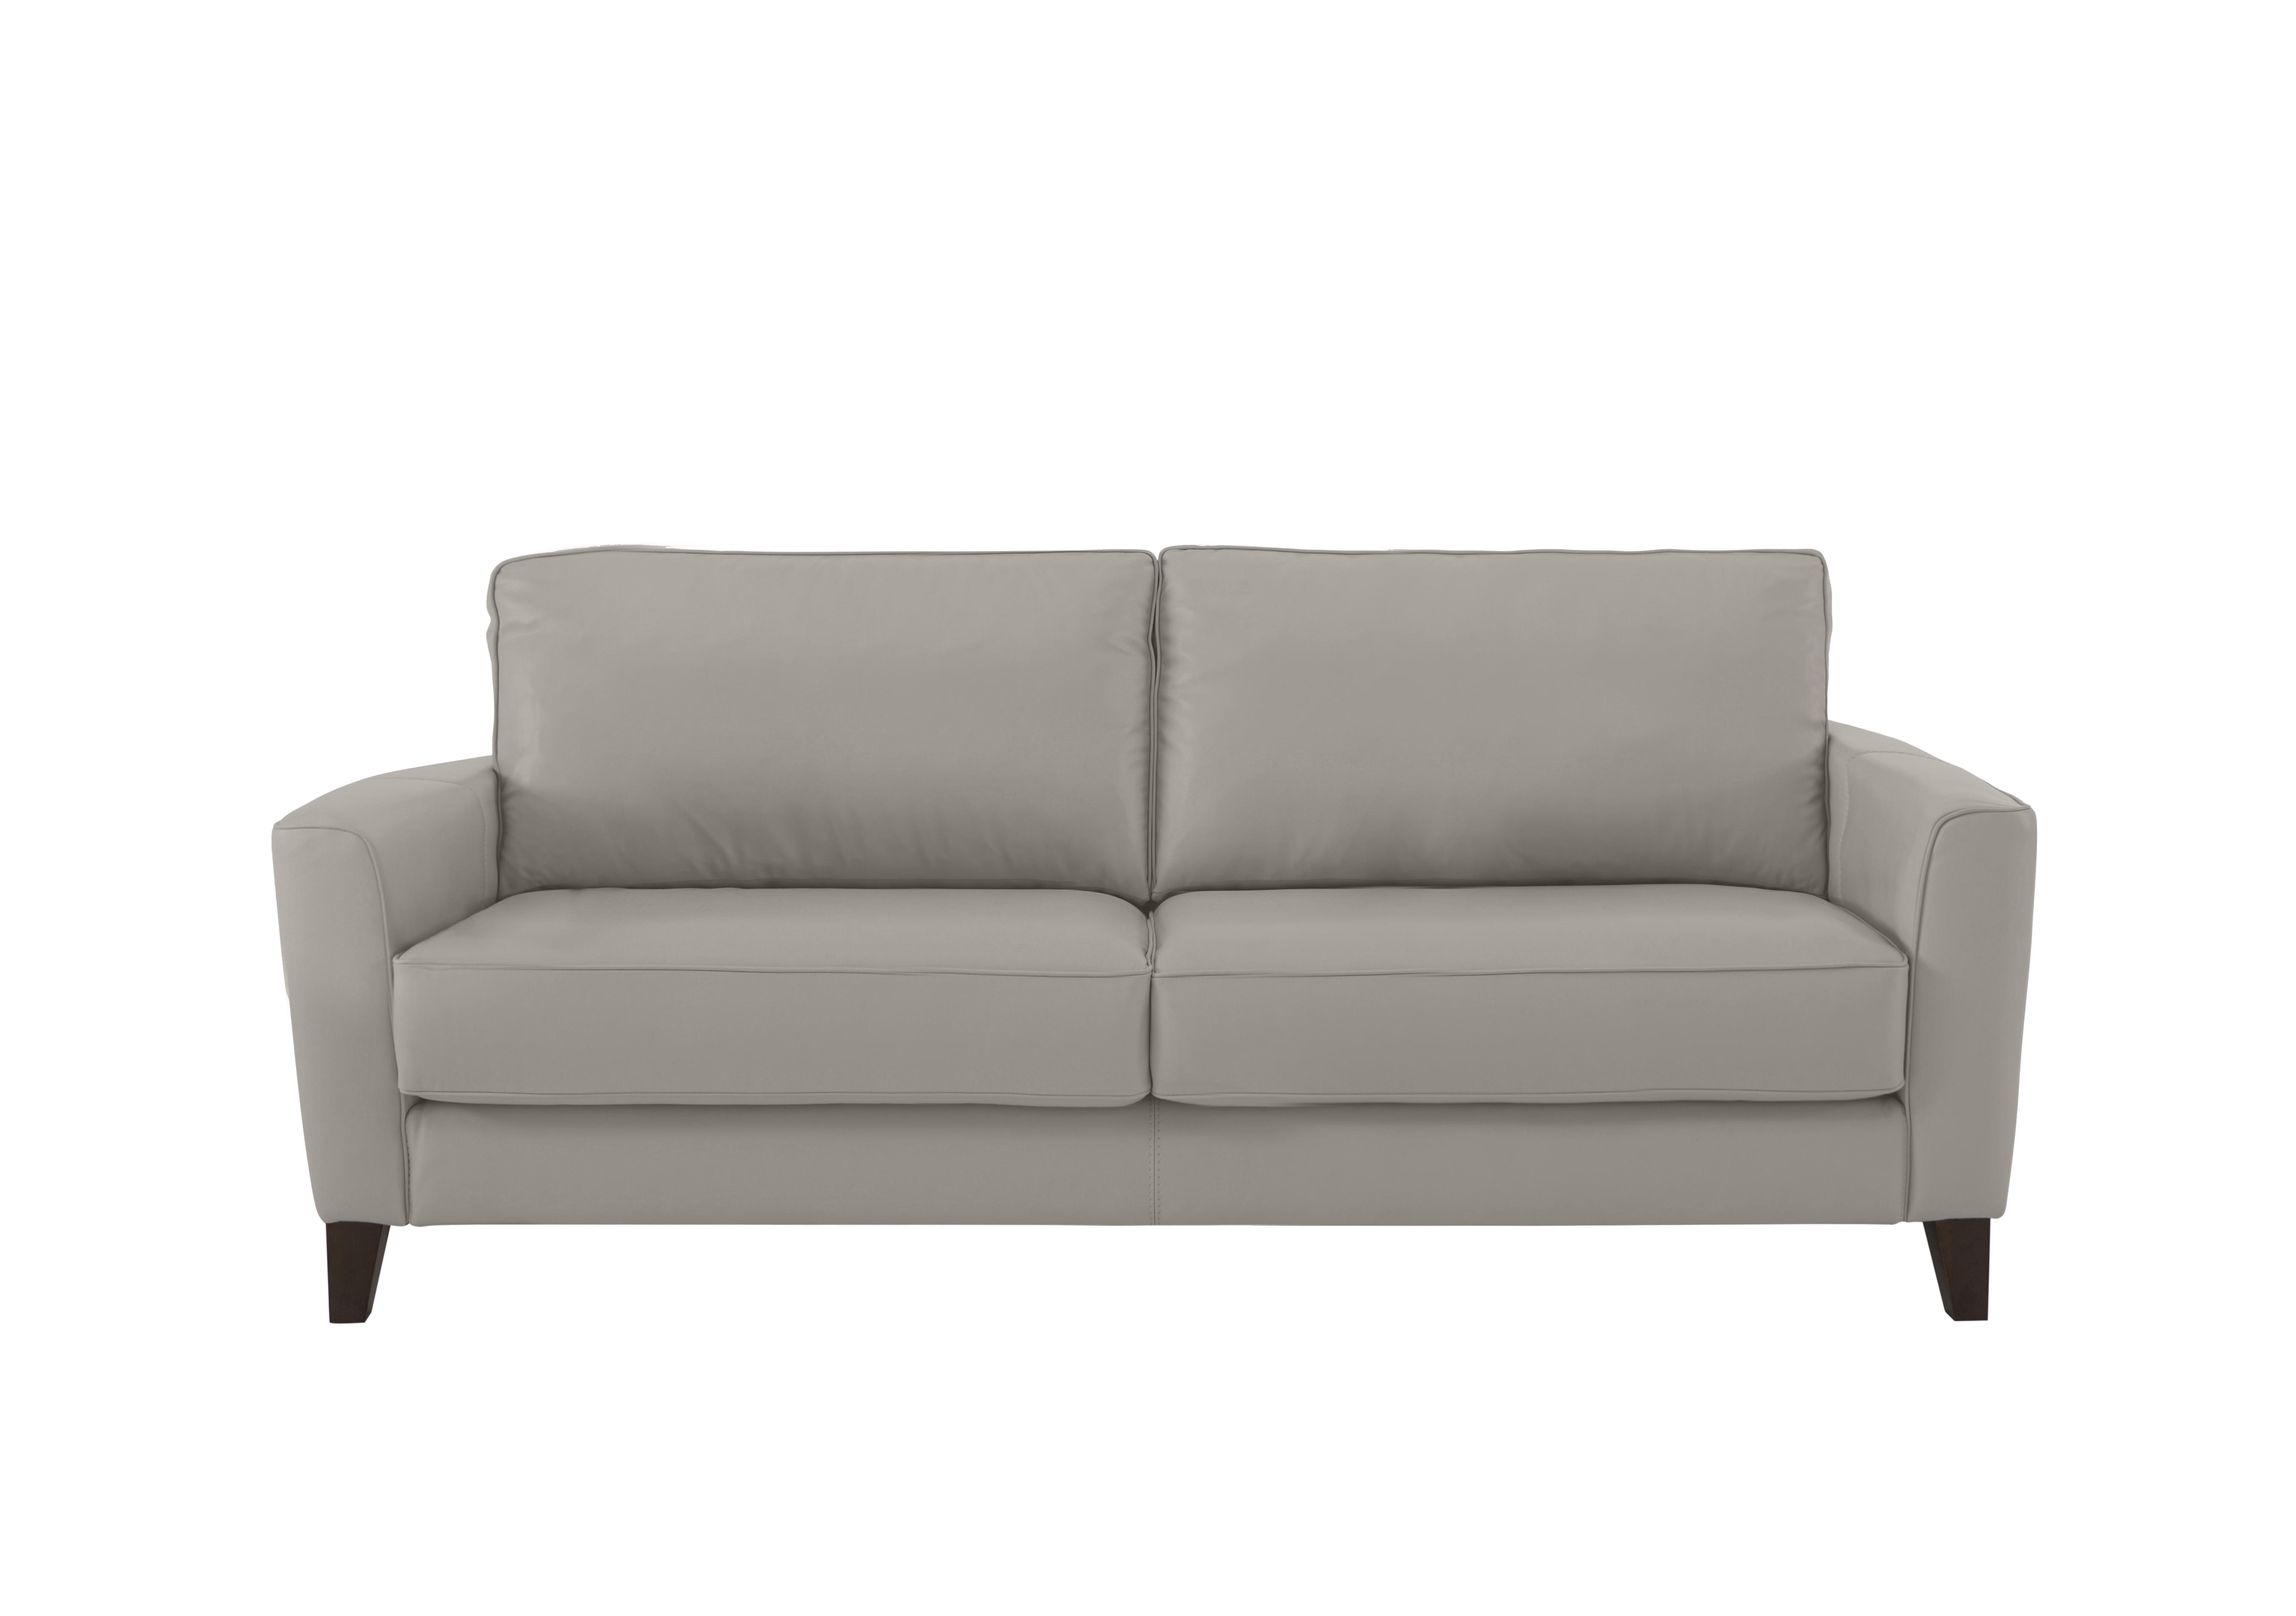 Brondby 3 Seater Leather Sofa in Bv-946b Silver Grey on Furniture Village